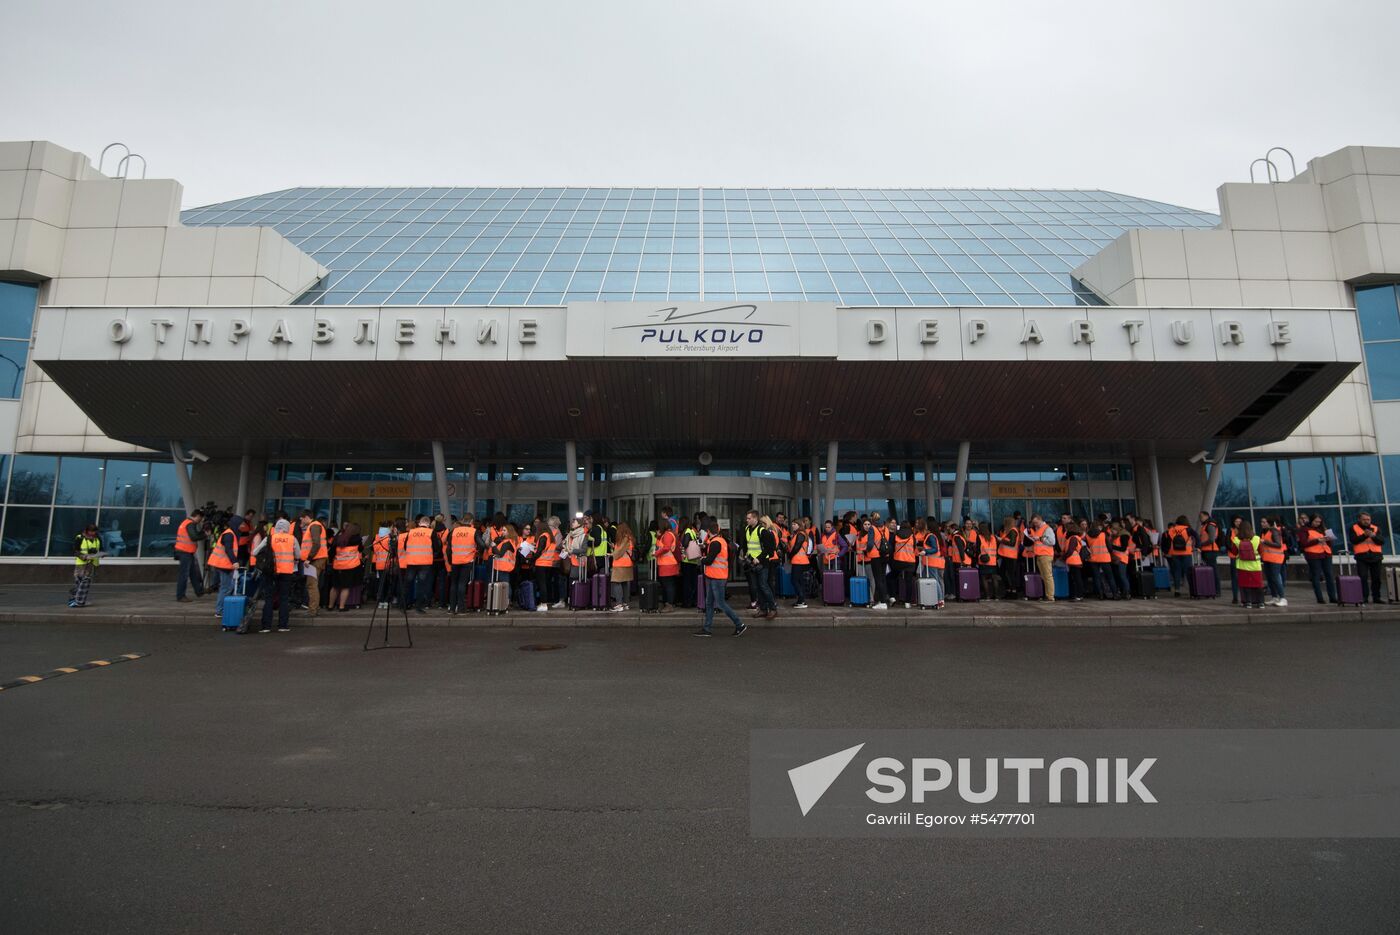 Temporary airport terminal for 2018 FIFA World Cup tested in St. Petersburg